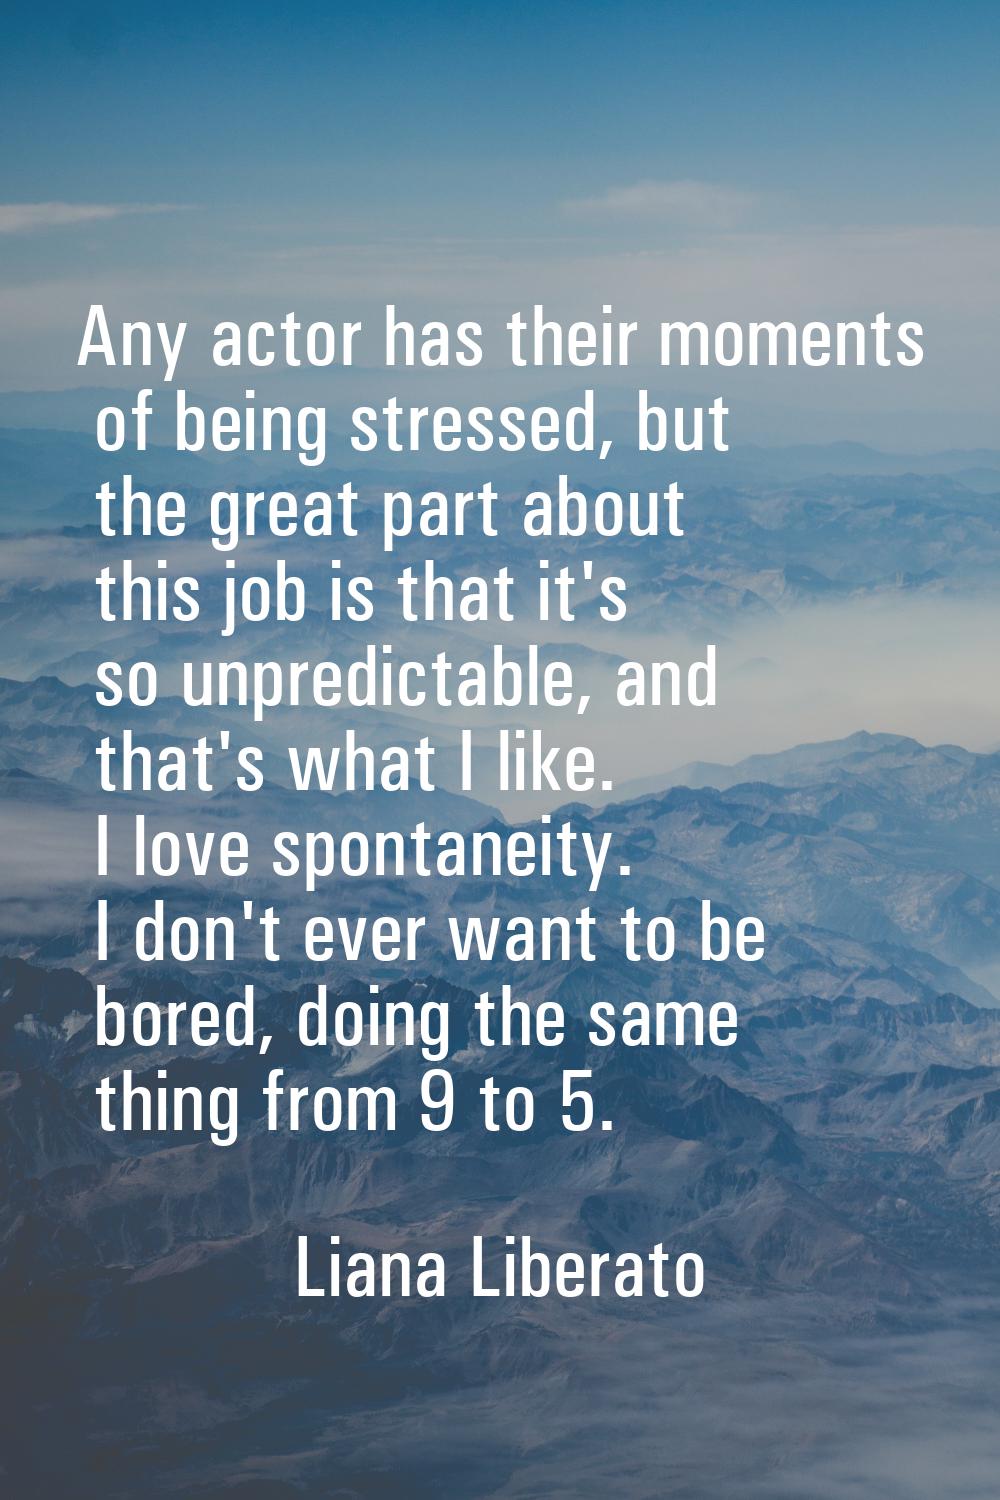 Any actor has their moments of being stressed, but the great part about this job is that it's so un